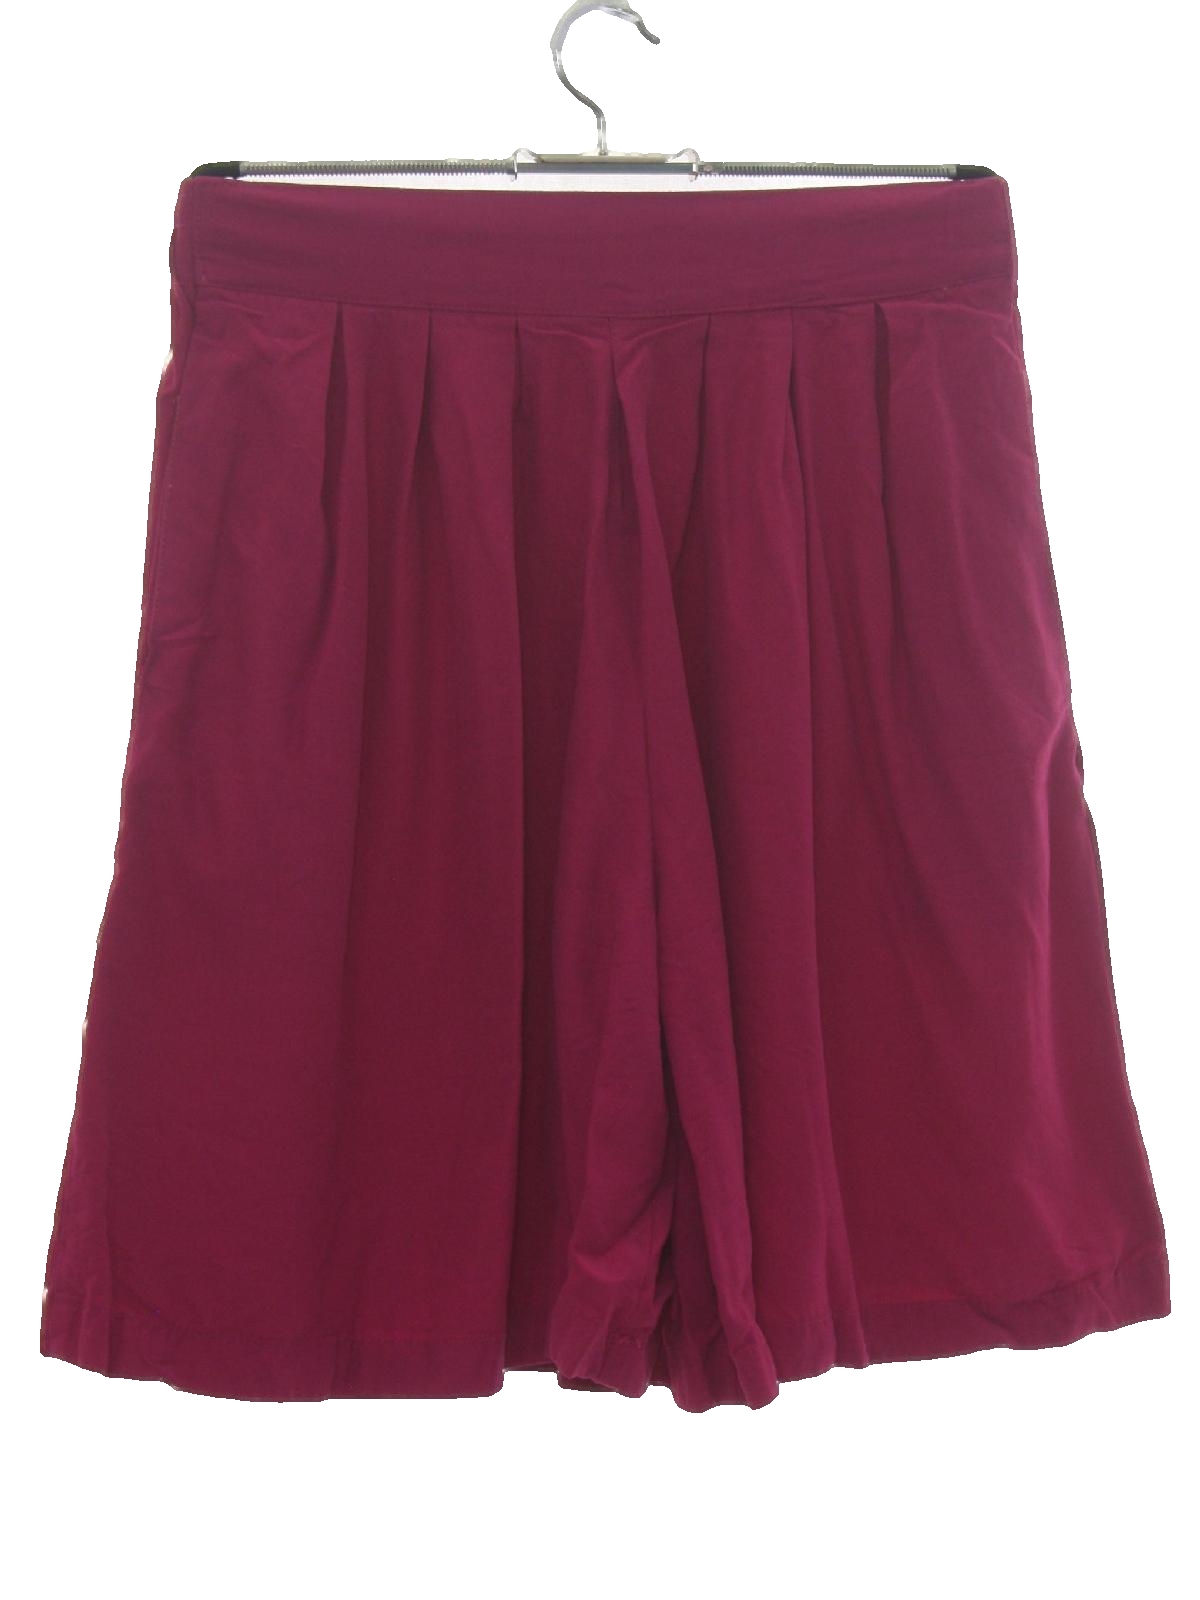 1980's Vintage The Limited Shorts: 80s -The Limited- Womens magenta ...